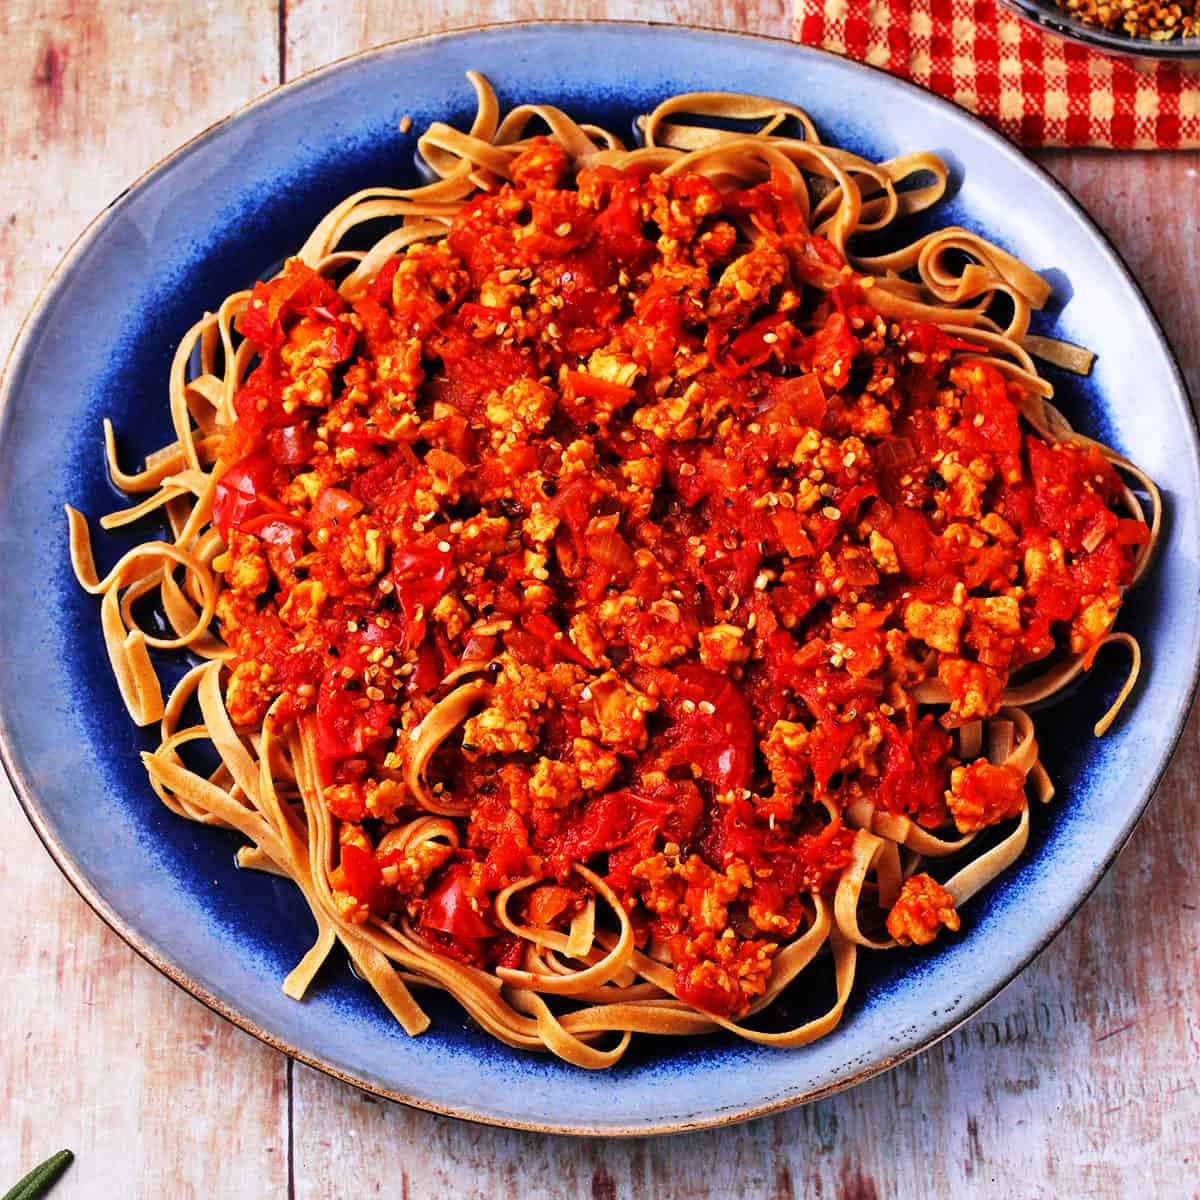 Tempeh Bolognese with wheat tagliatelli pasta on blue plate.